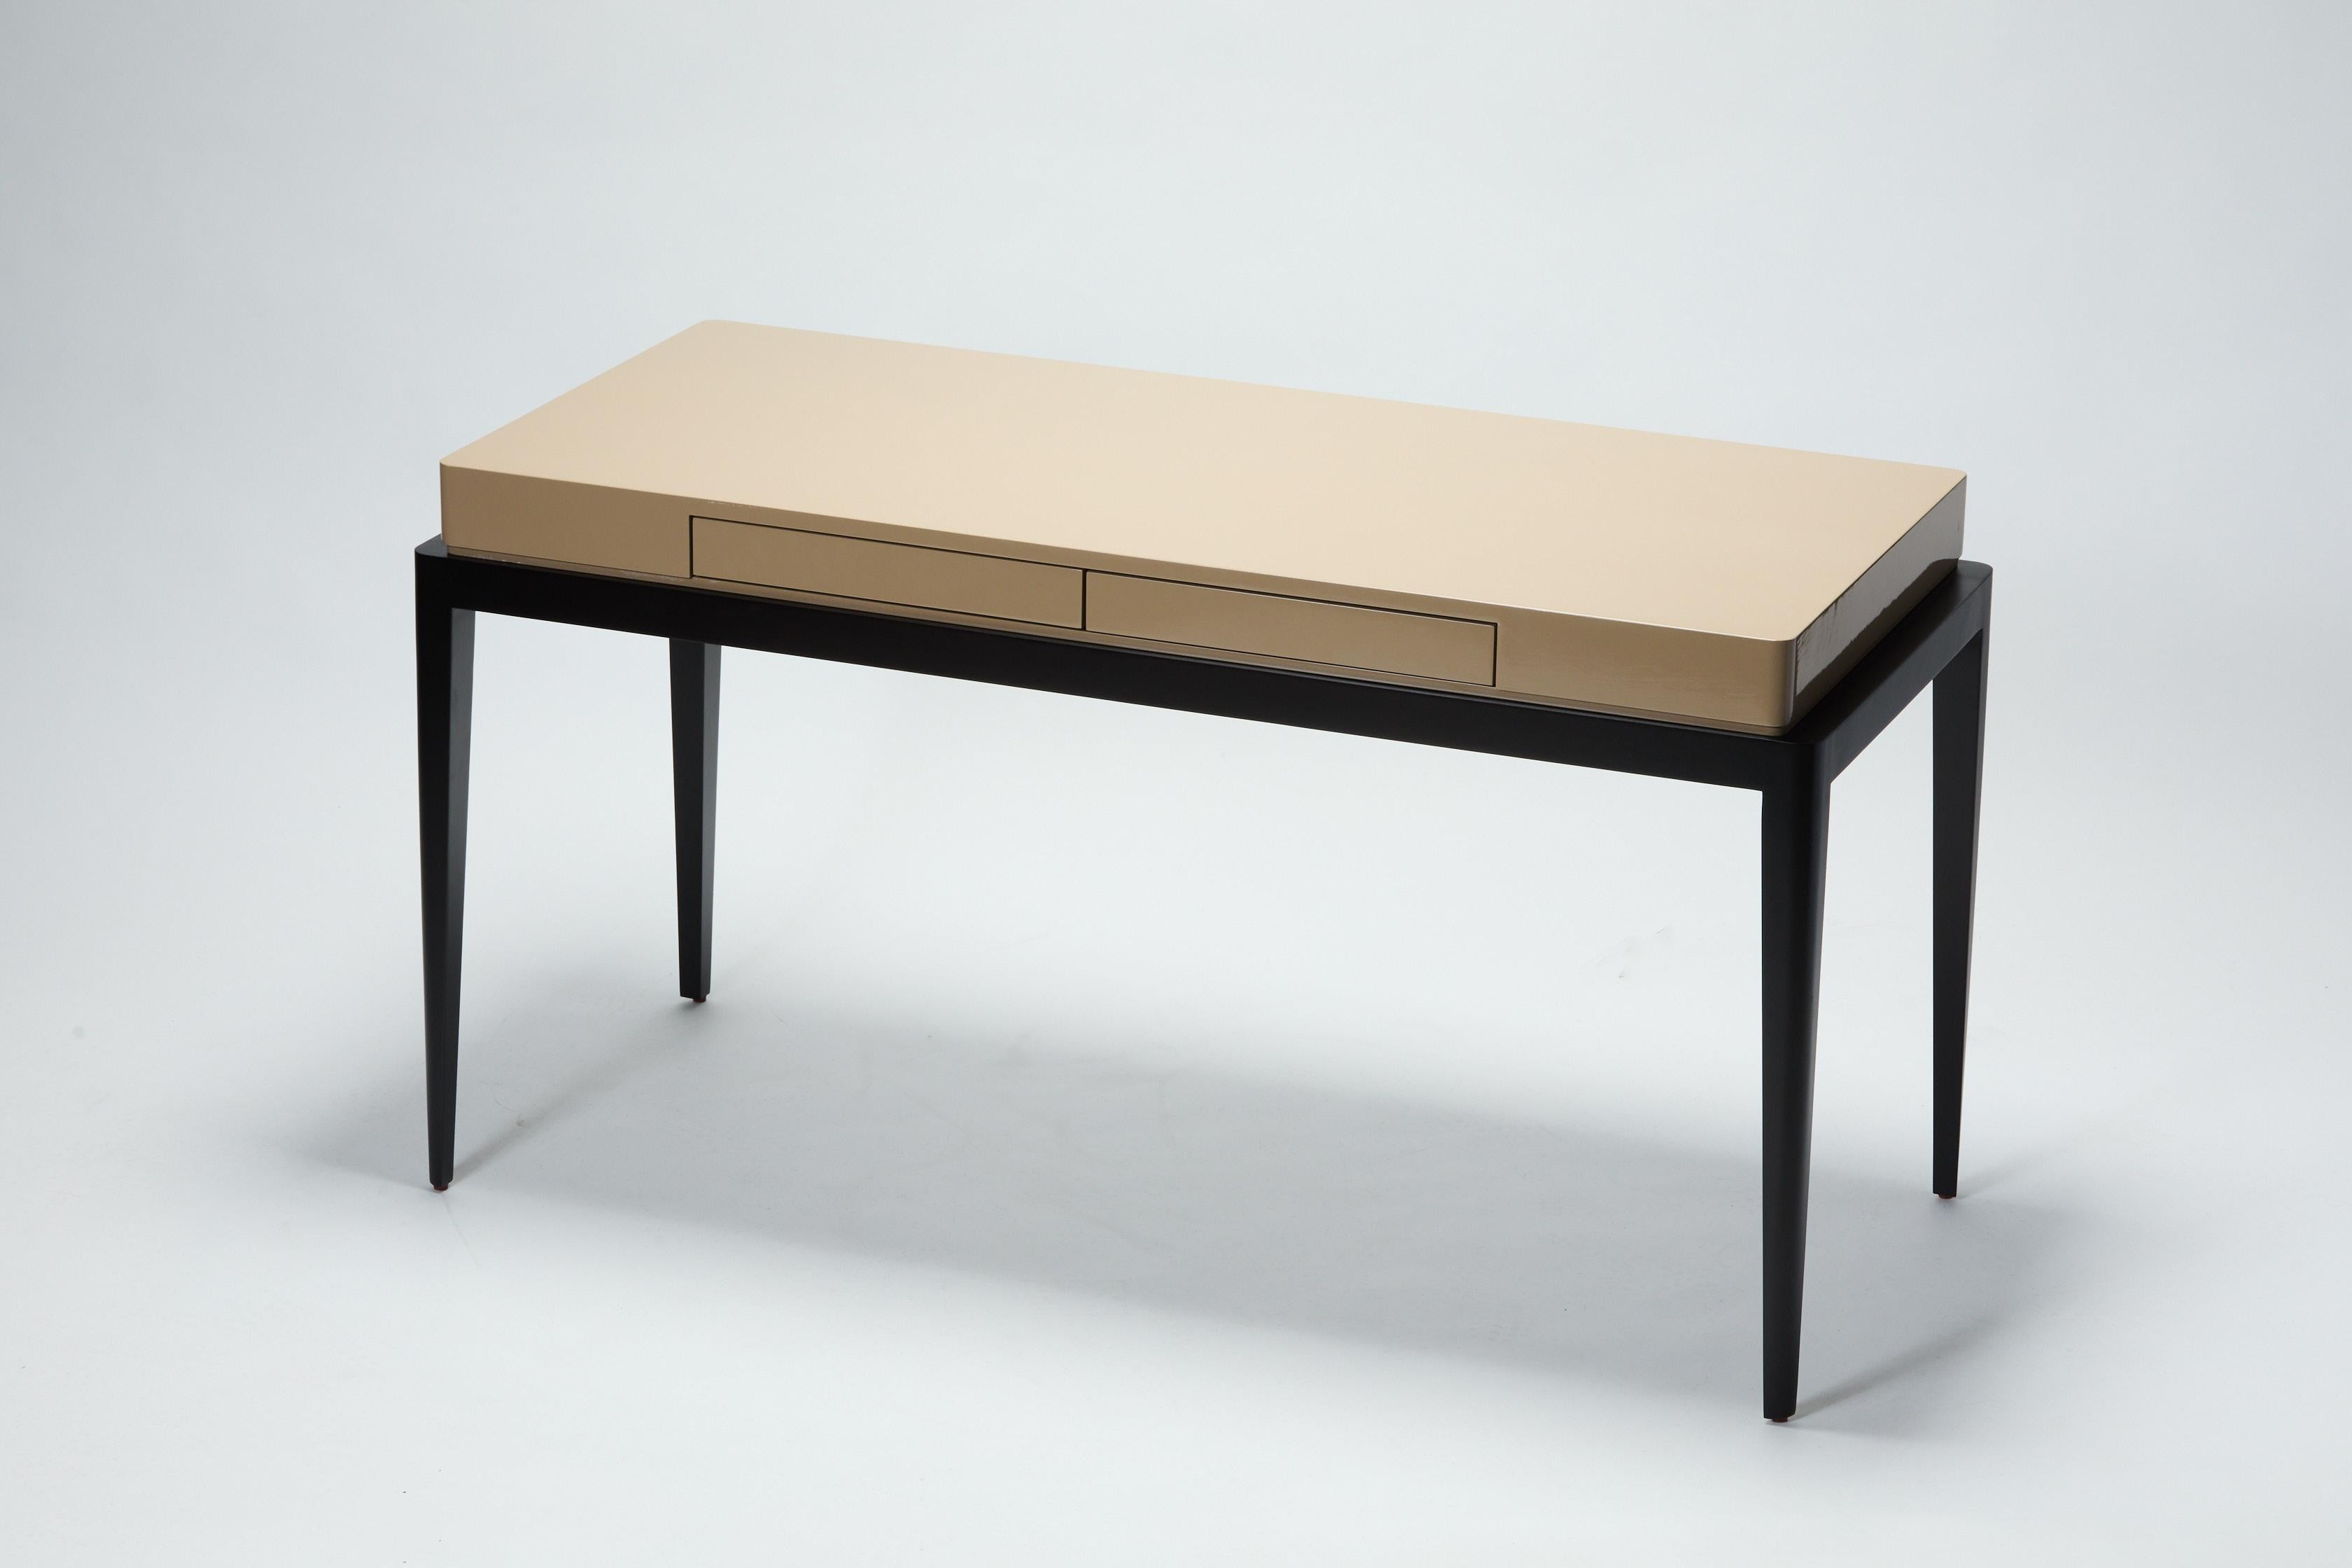 The perfect interior writing desk. Size: 140cm
Flat surface, smooth, purity of the line only asking to be inhabited. If it is a
console or a desk, TARA is a piece that distinguish itself with the power of its
minimalism. It is enough to dress up any